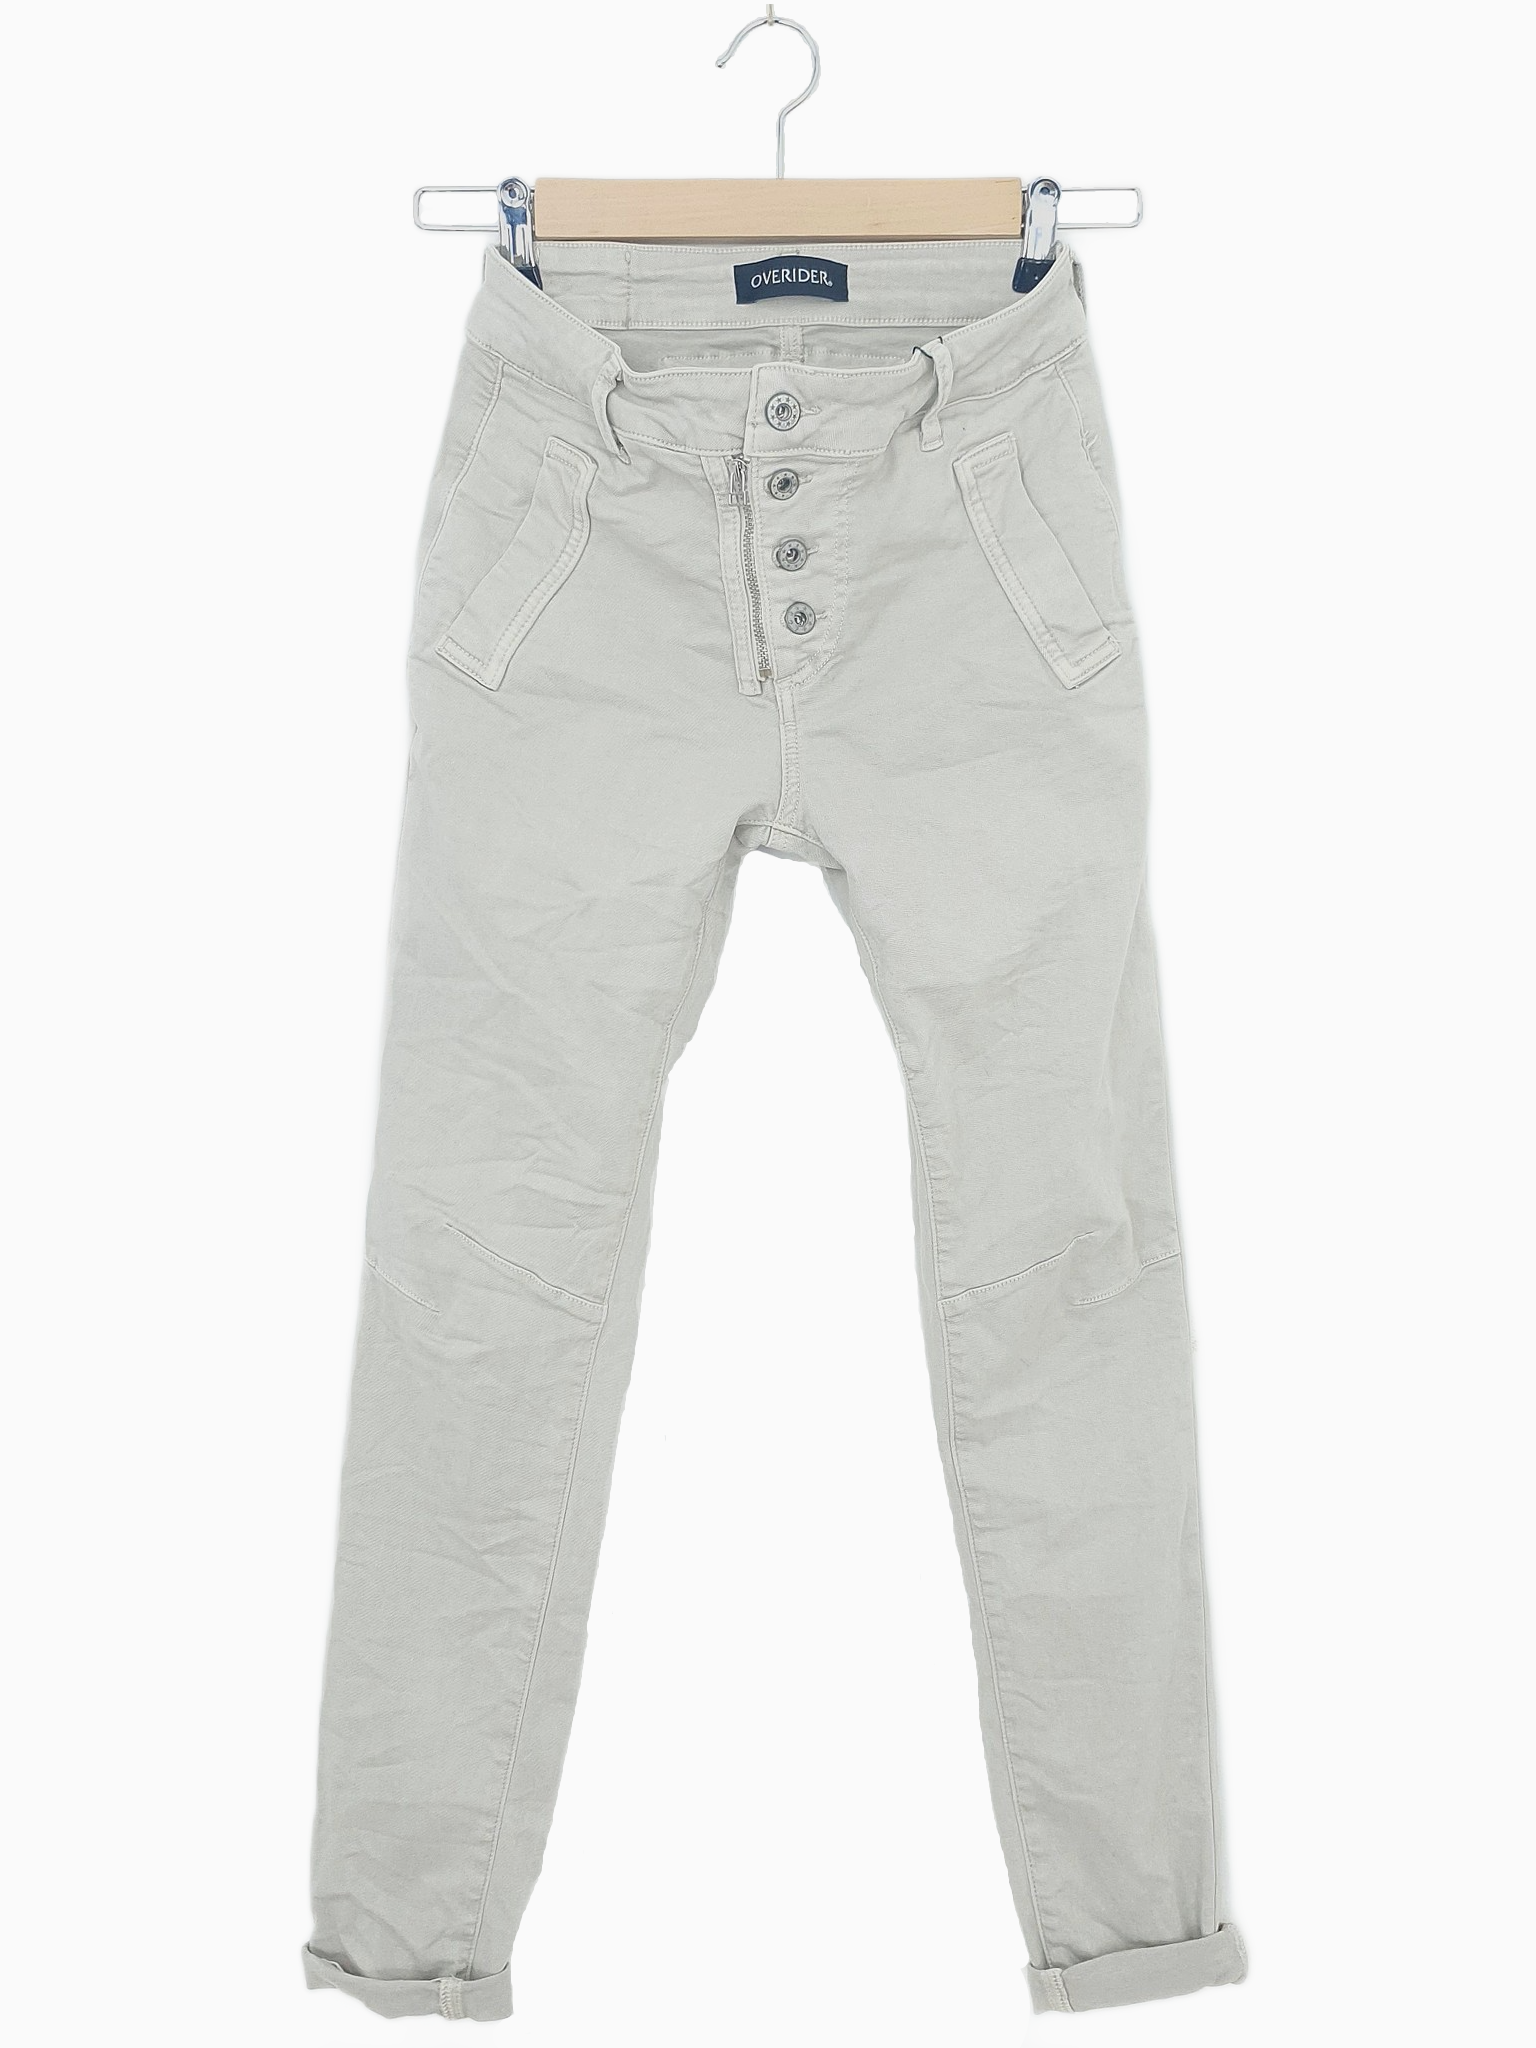 INGA | Skinny Jeans with Zip & Buttons | Stone